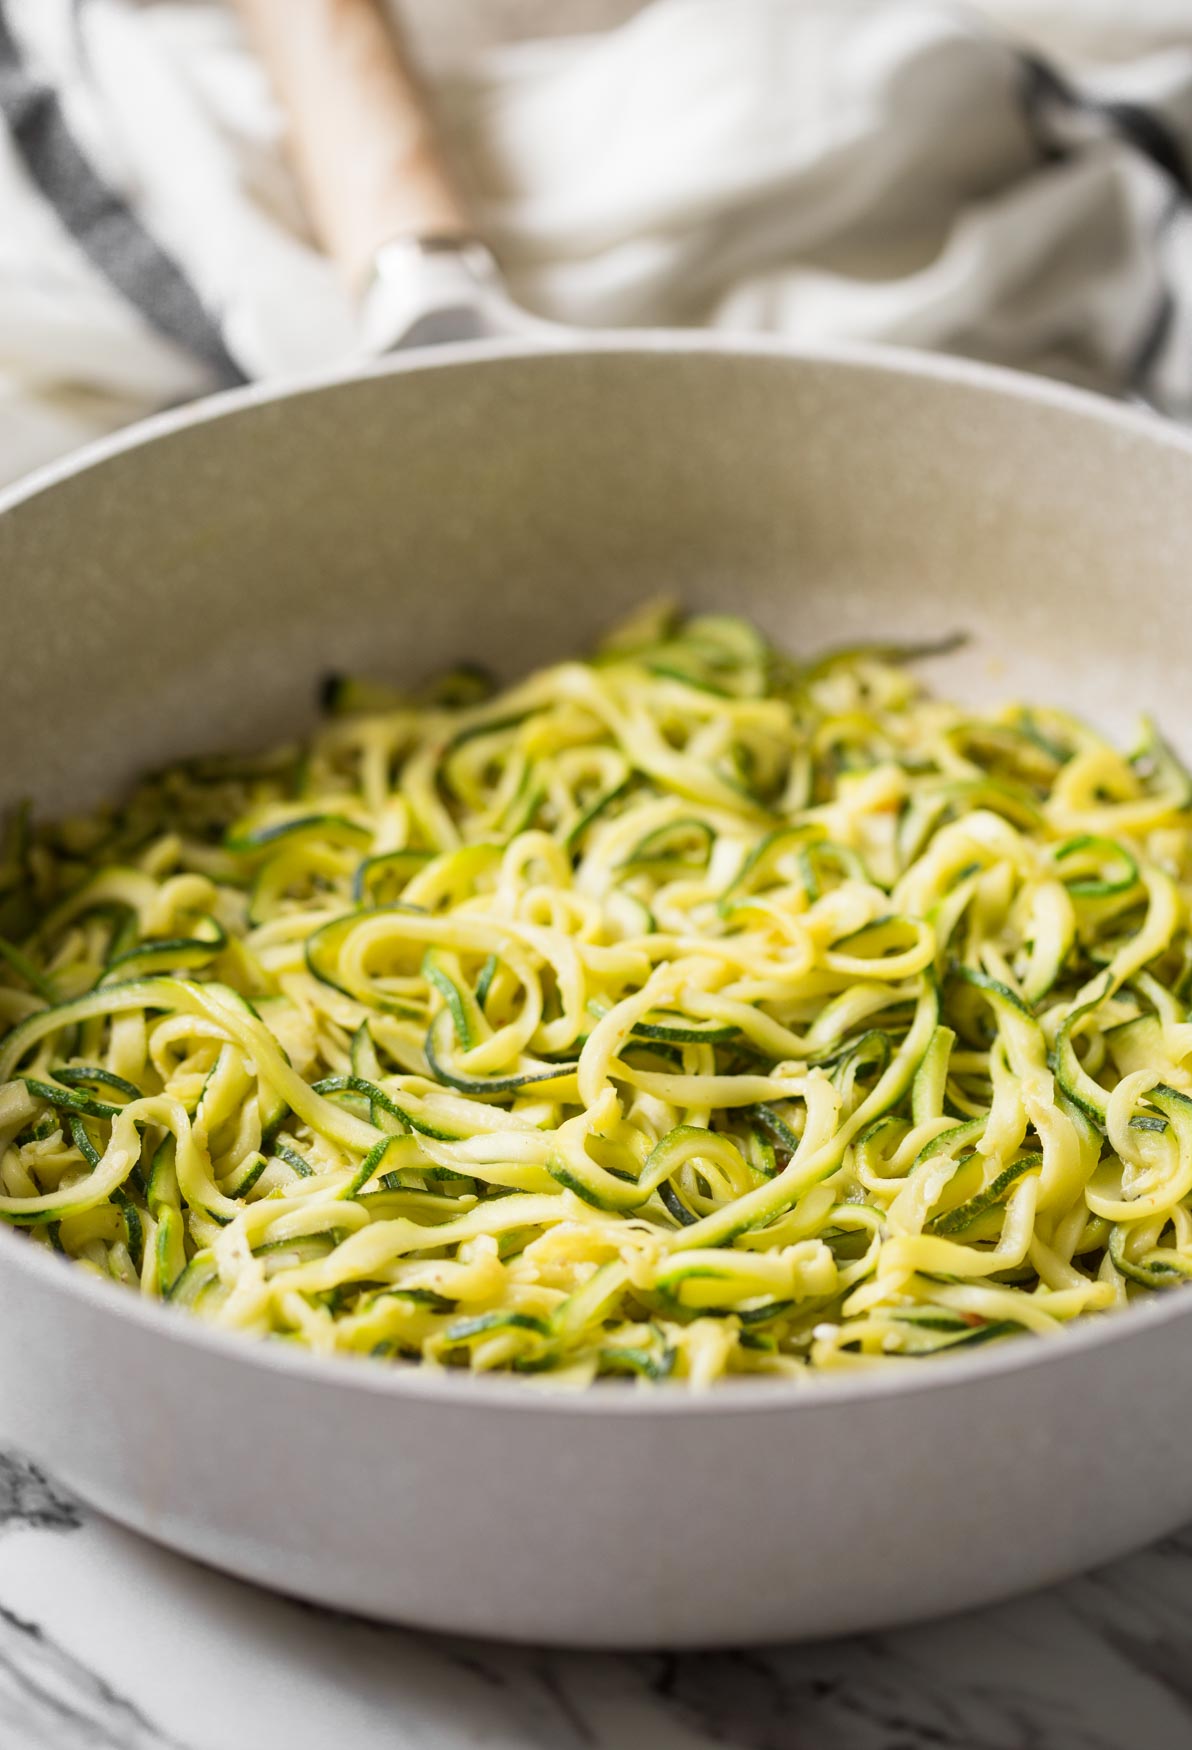 Fresh zucchini noodles stir-fried in a skillet with chili, garlic, and olive oil